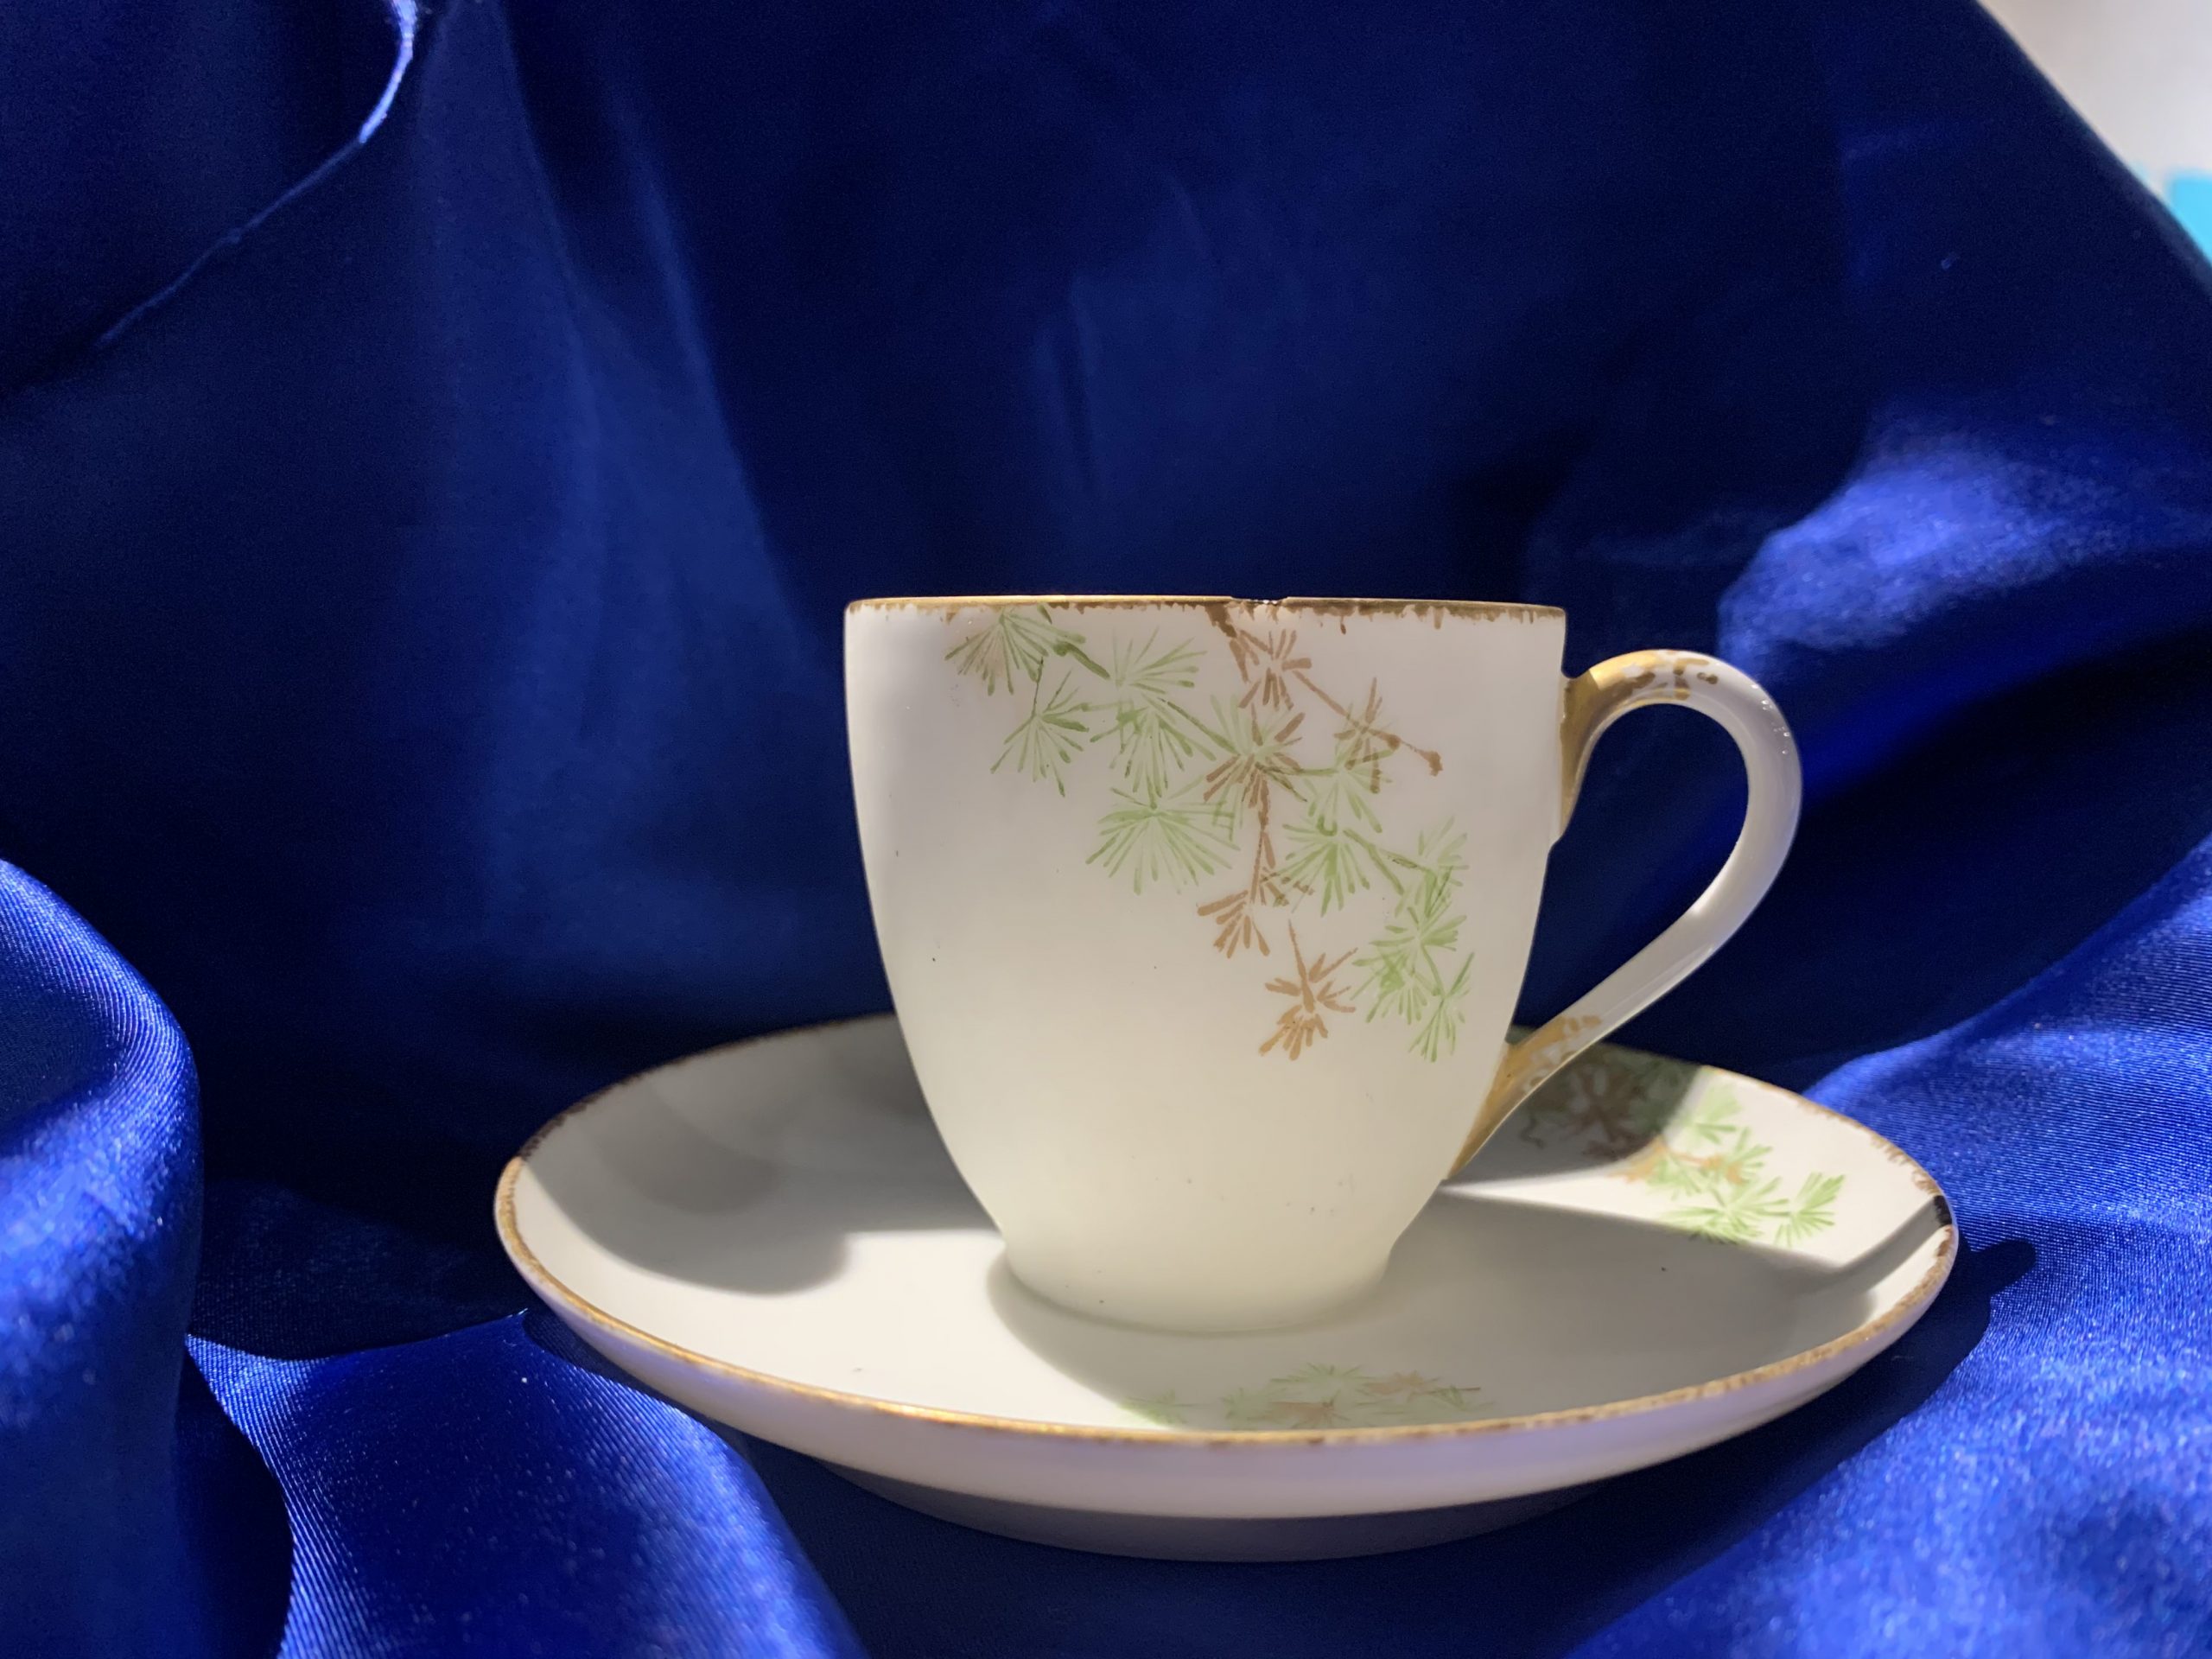 China Tea Set – Painted for the George Elliot Club by Luella Vance Phillips, a well-known China painter who lived in Hastings in the 1880s.